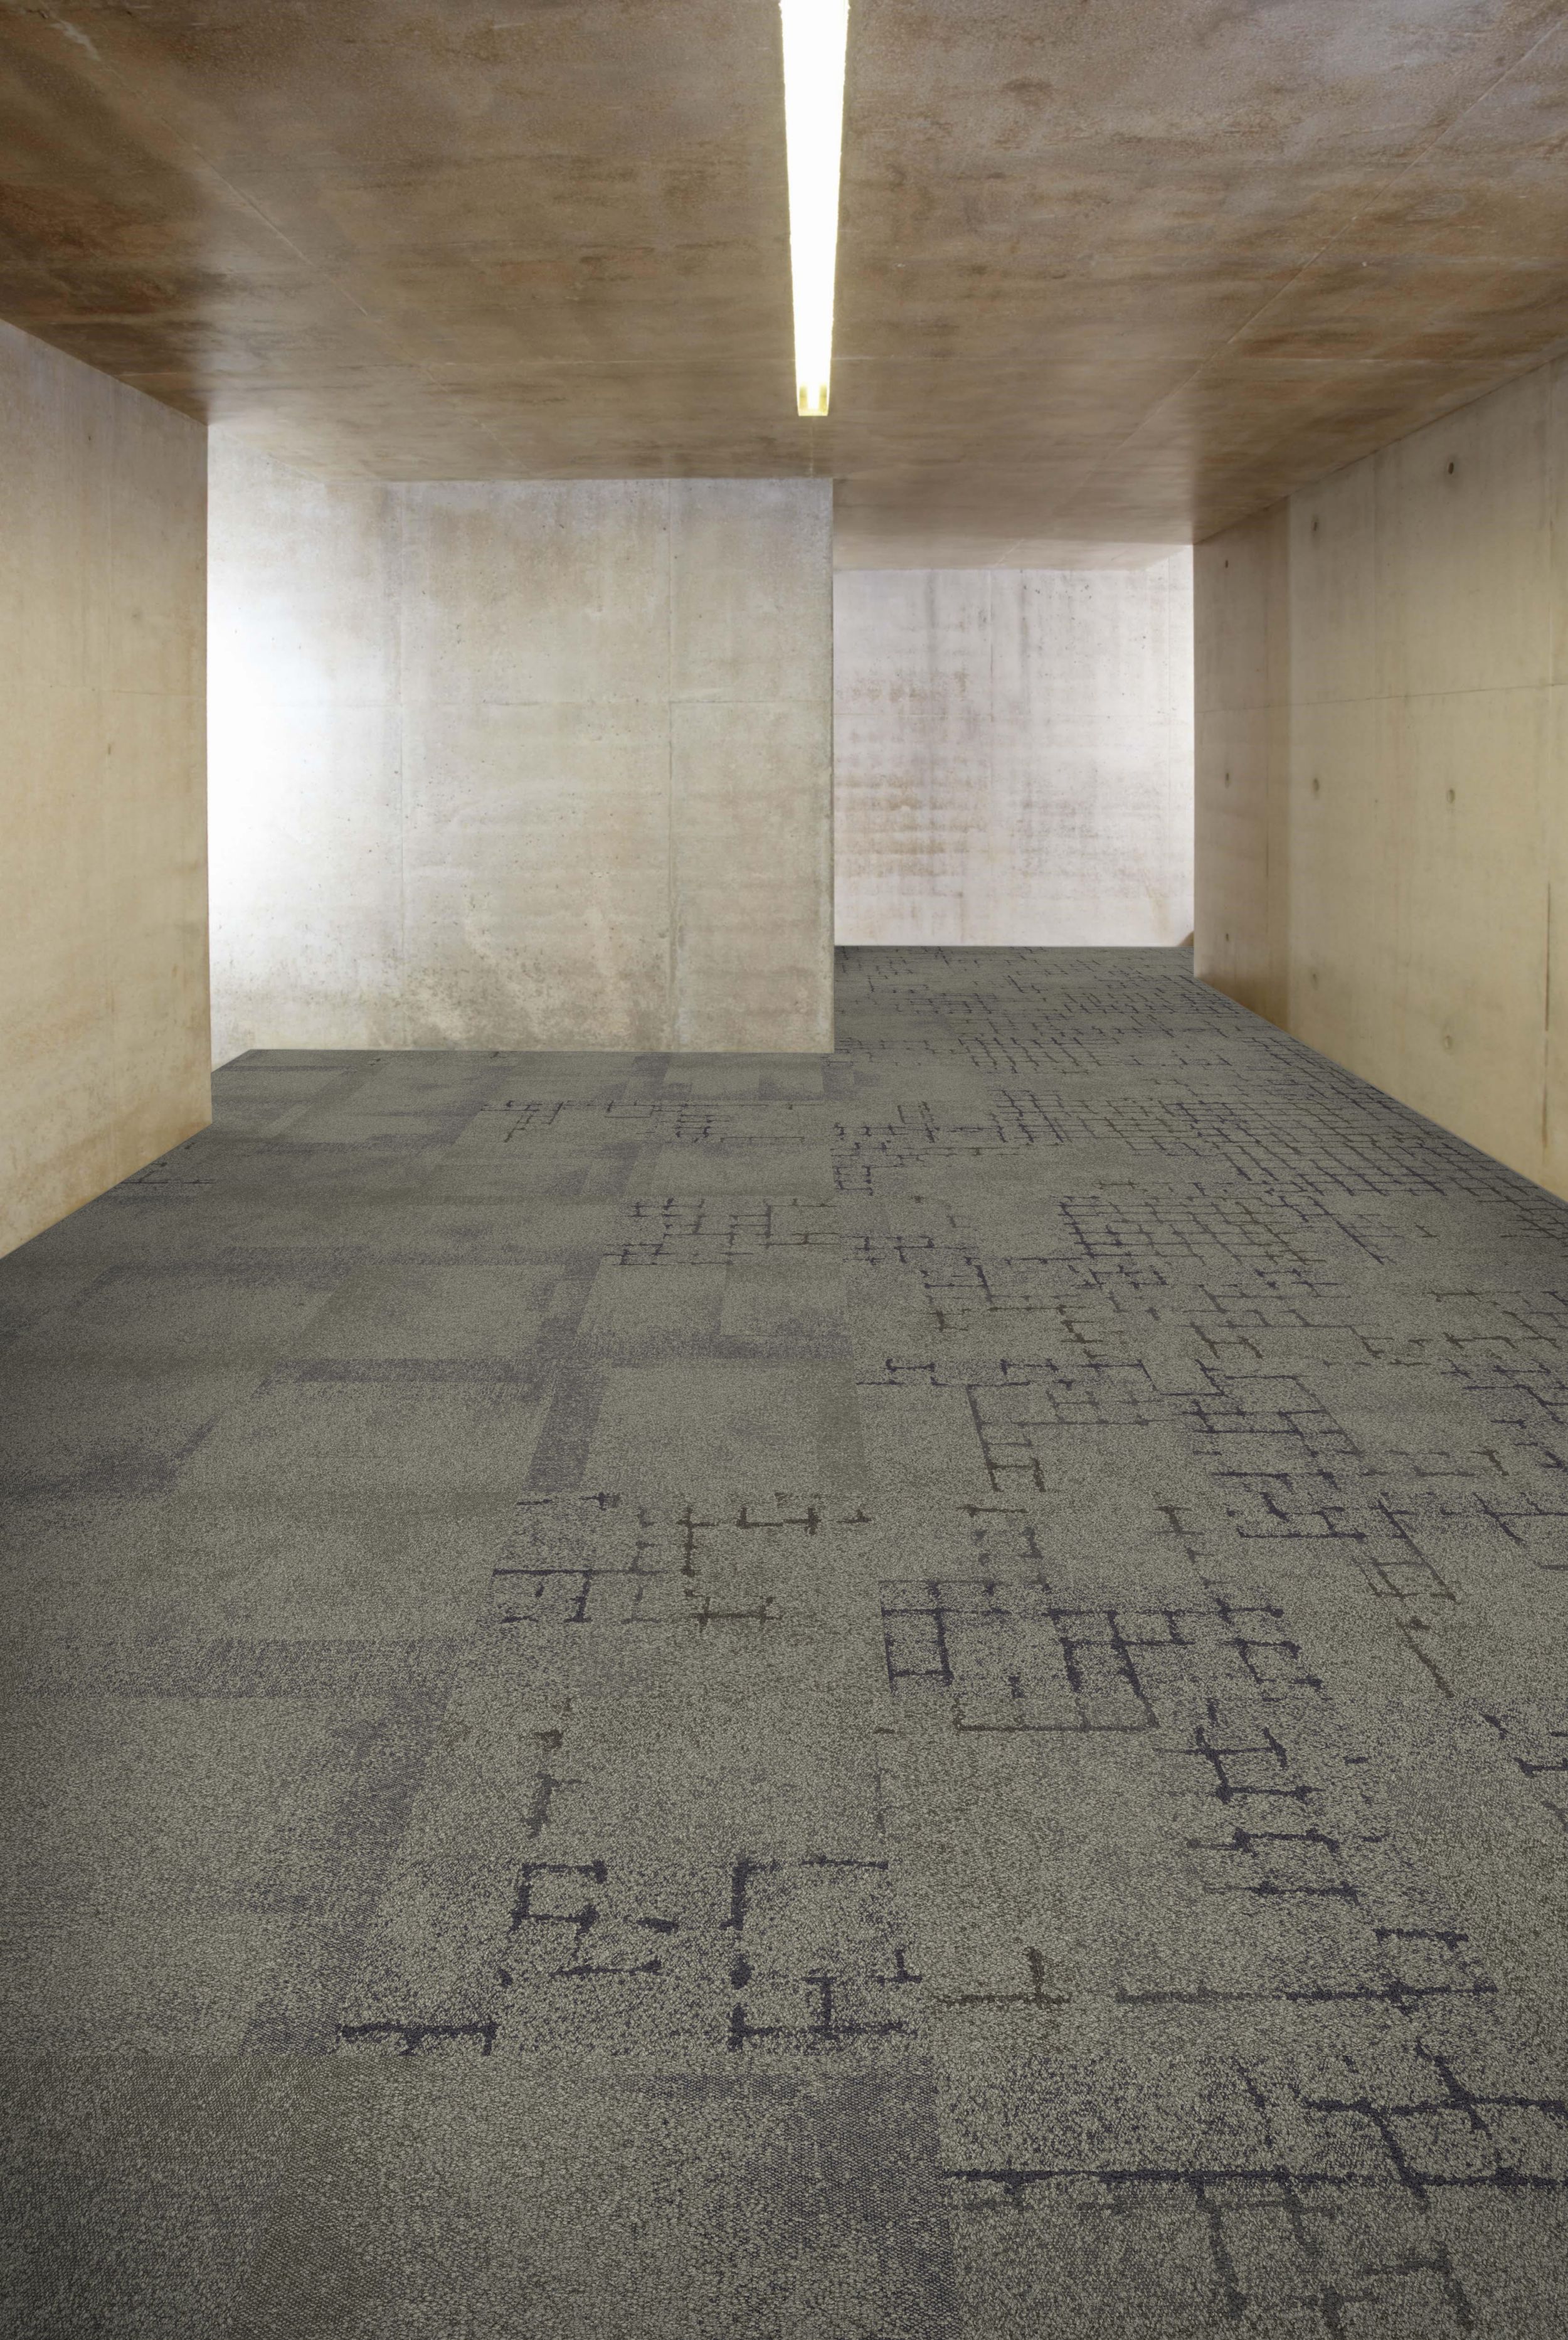 image Interface Flagstone, Kerbstone and Sett in Stone carpet tile in corridor with concrete walls and ceiling numéro 2